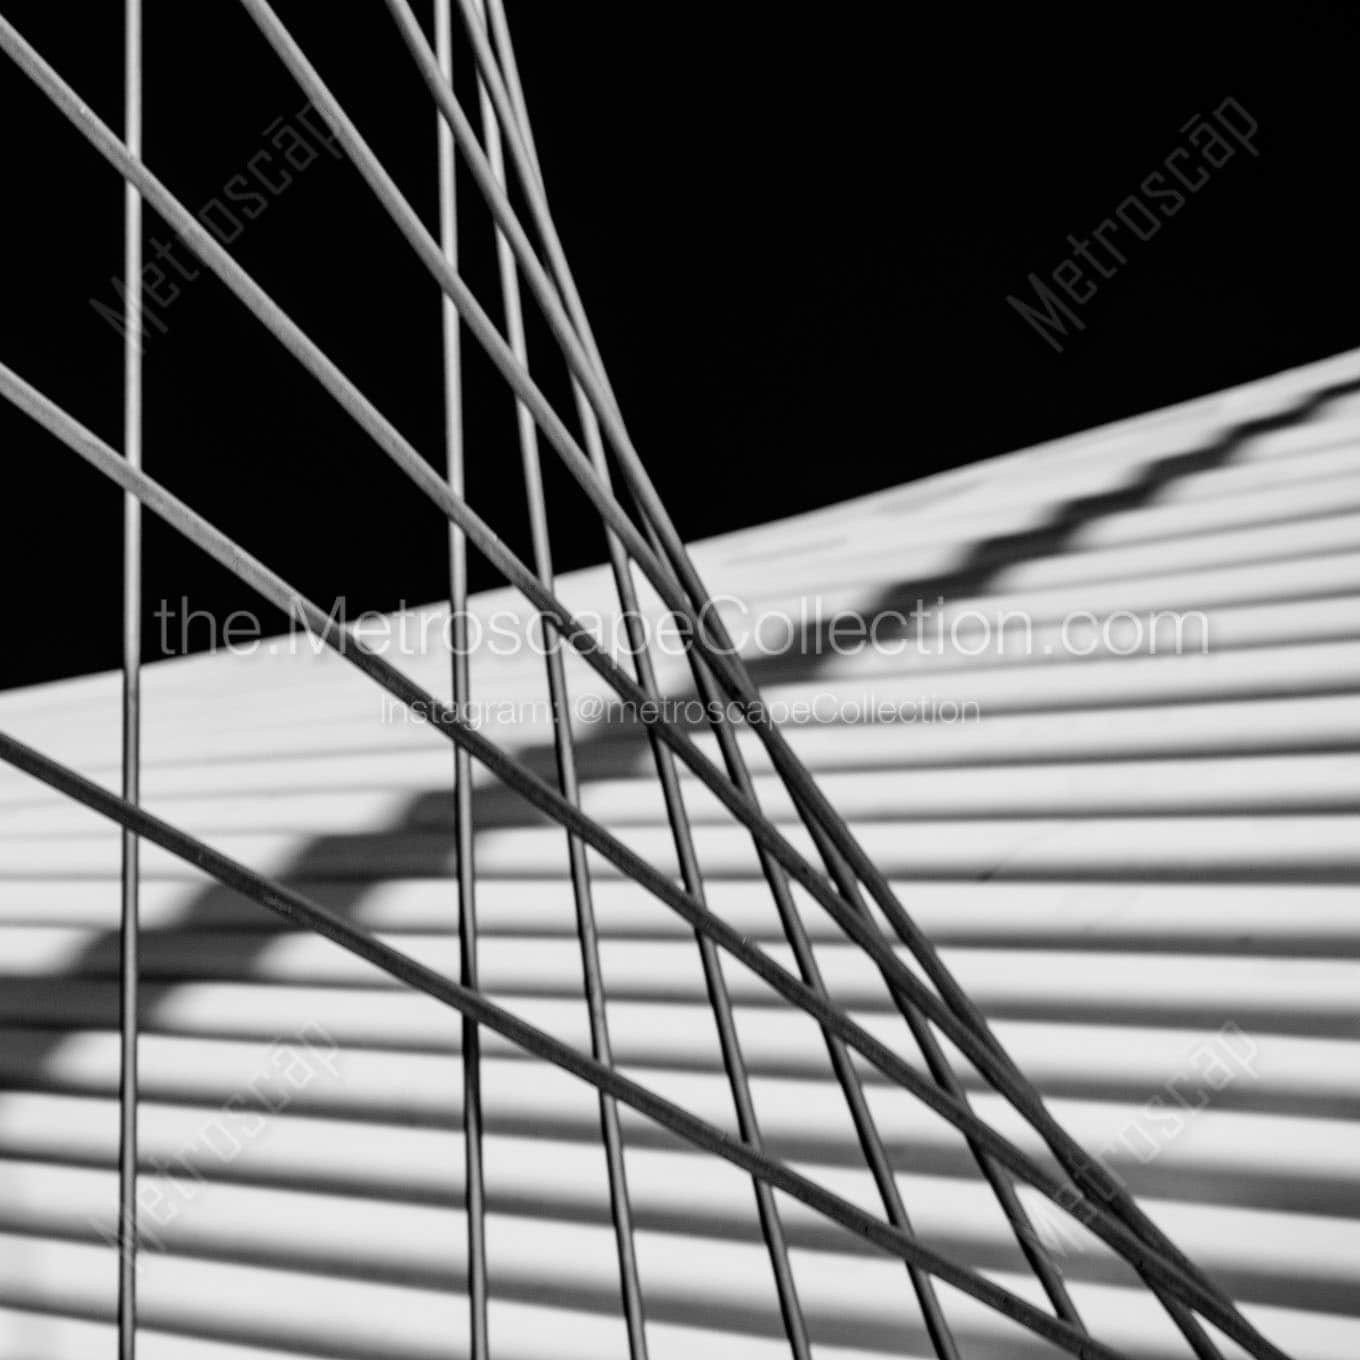 milwaukee art museum support cables Black & White Wall Art